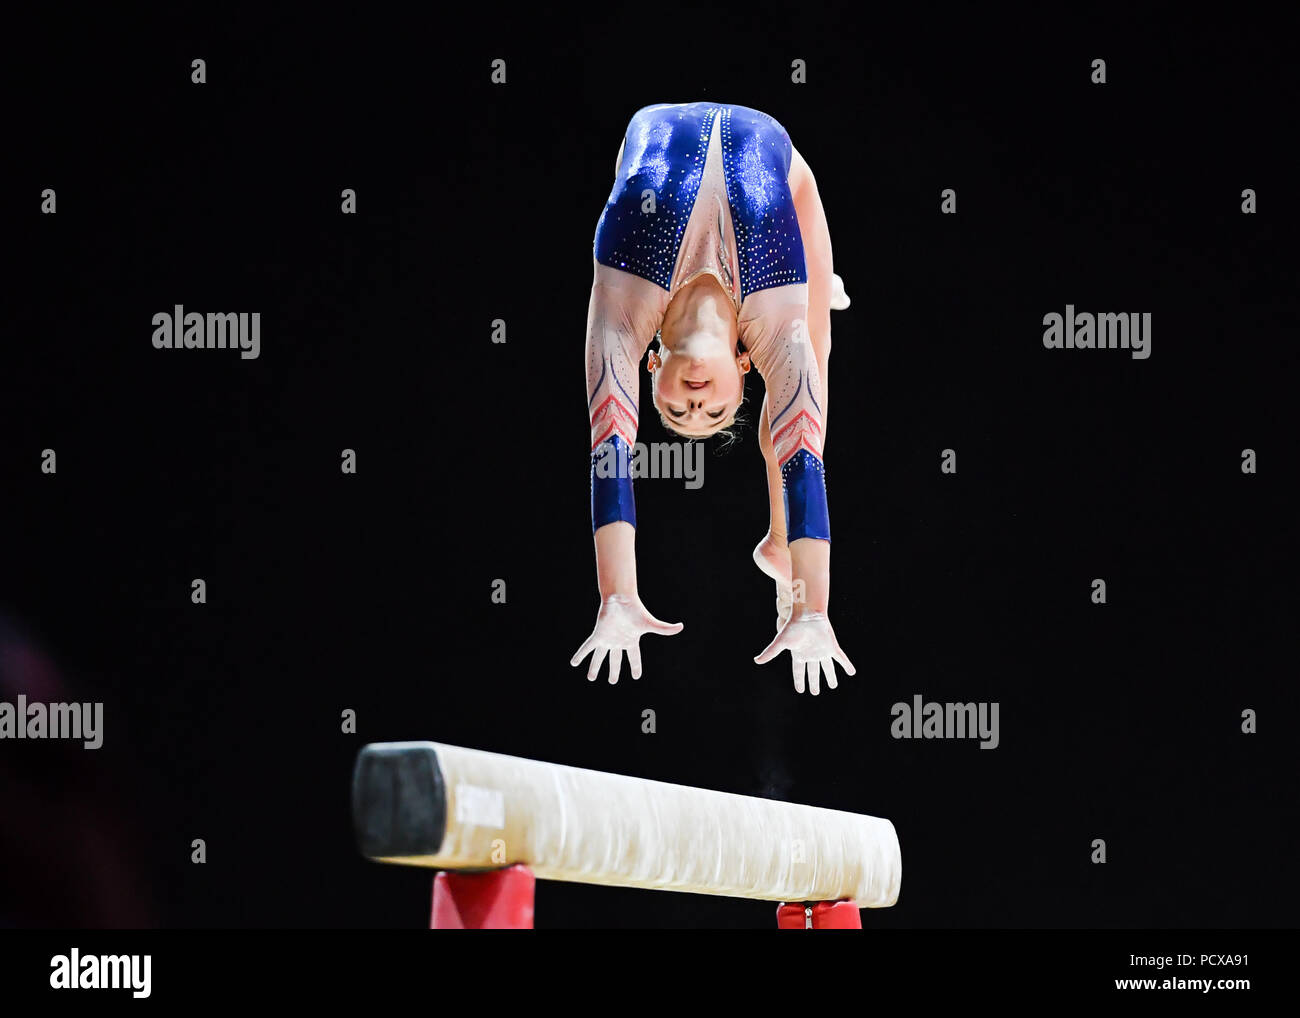 Glasgow, UK, 4 Aug 2018. CHARPY Lorette (FRA) competes on Balance Beam in Women's Artistic Gymnastics Team Final during the European Championships Glasgow 2018 at The SSE Hydro on Saturday, 04 August 2018. GLASGOW SCOTLAND . Credit: Taka G Wu Credit: Taka Wu/Alamy Live News Stock Photo